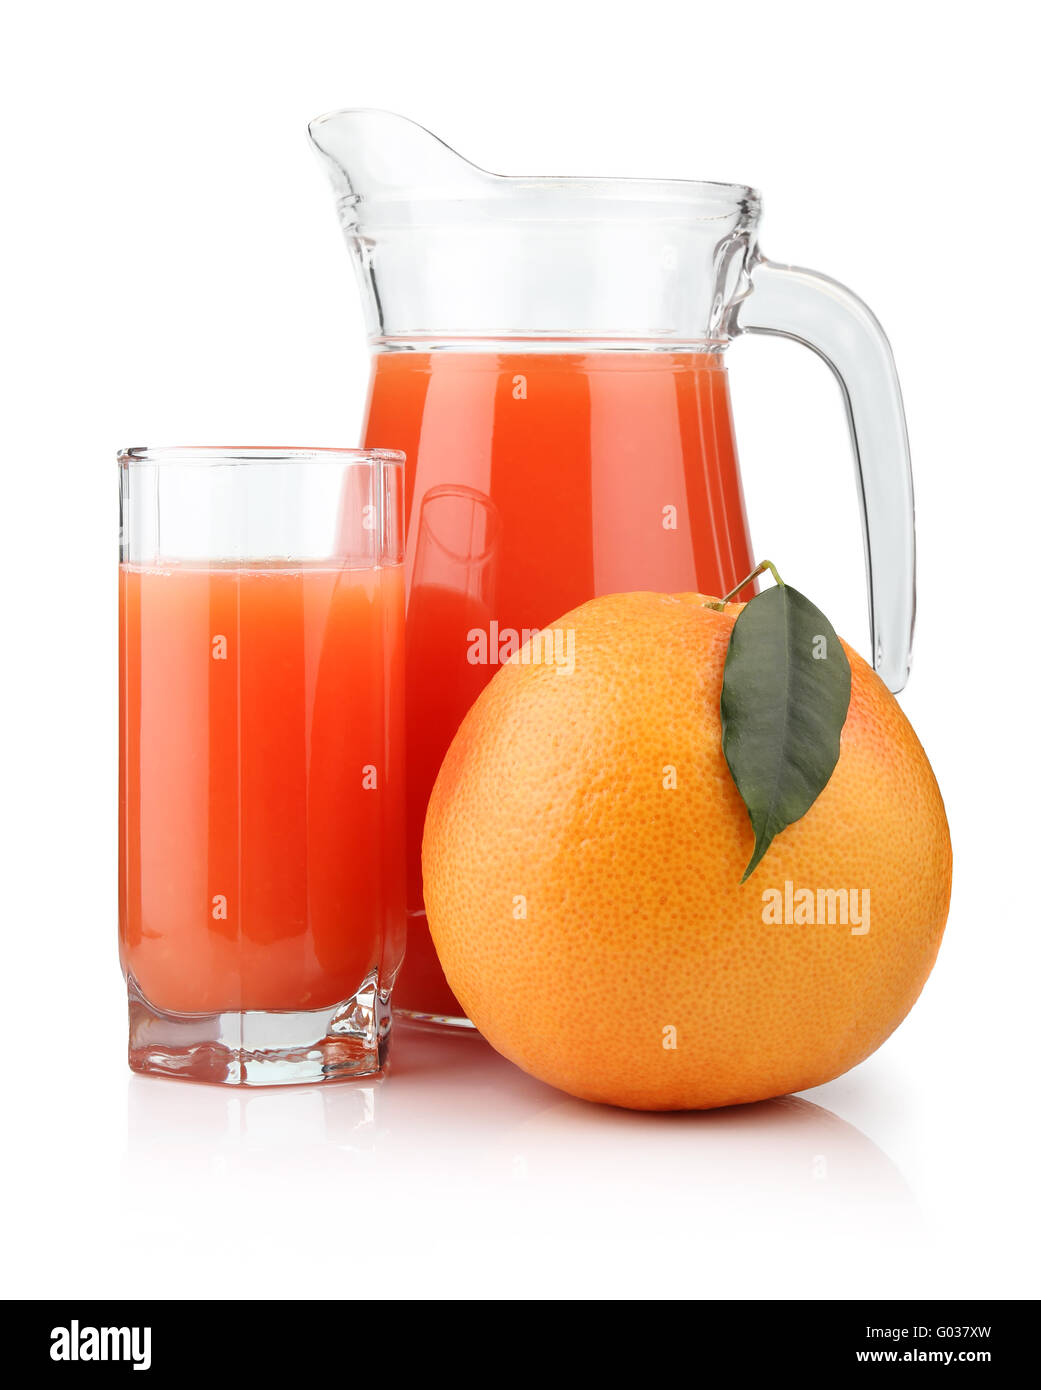 https://c8.alamy.com/comp/G037XW/full-glass-and-jug-of-grapefruit-juice-and-fruit-isolated-G037XW.jpg